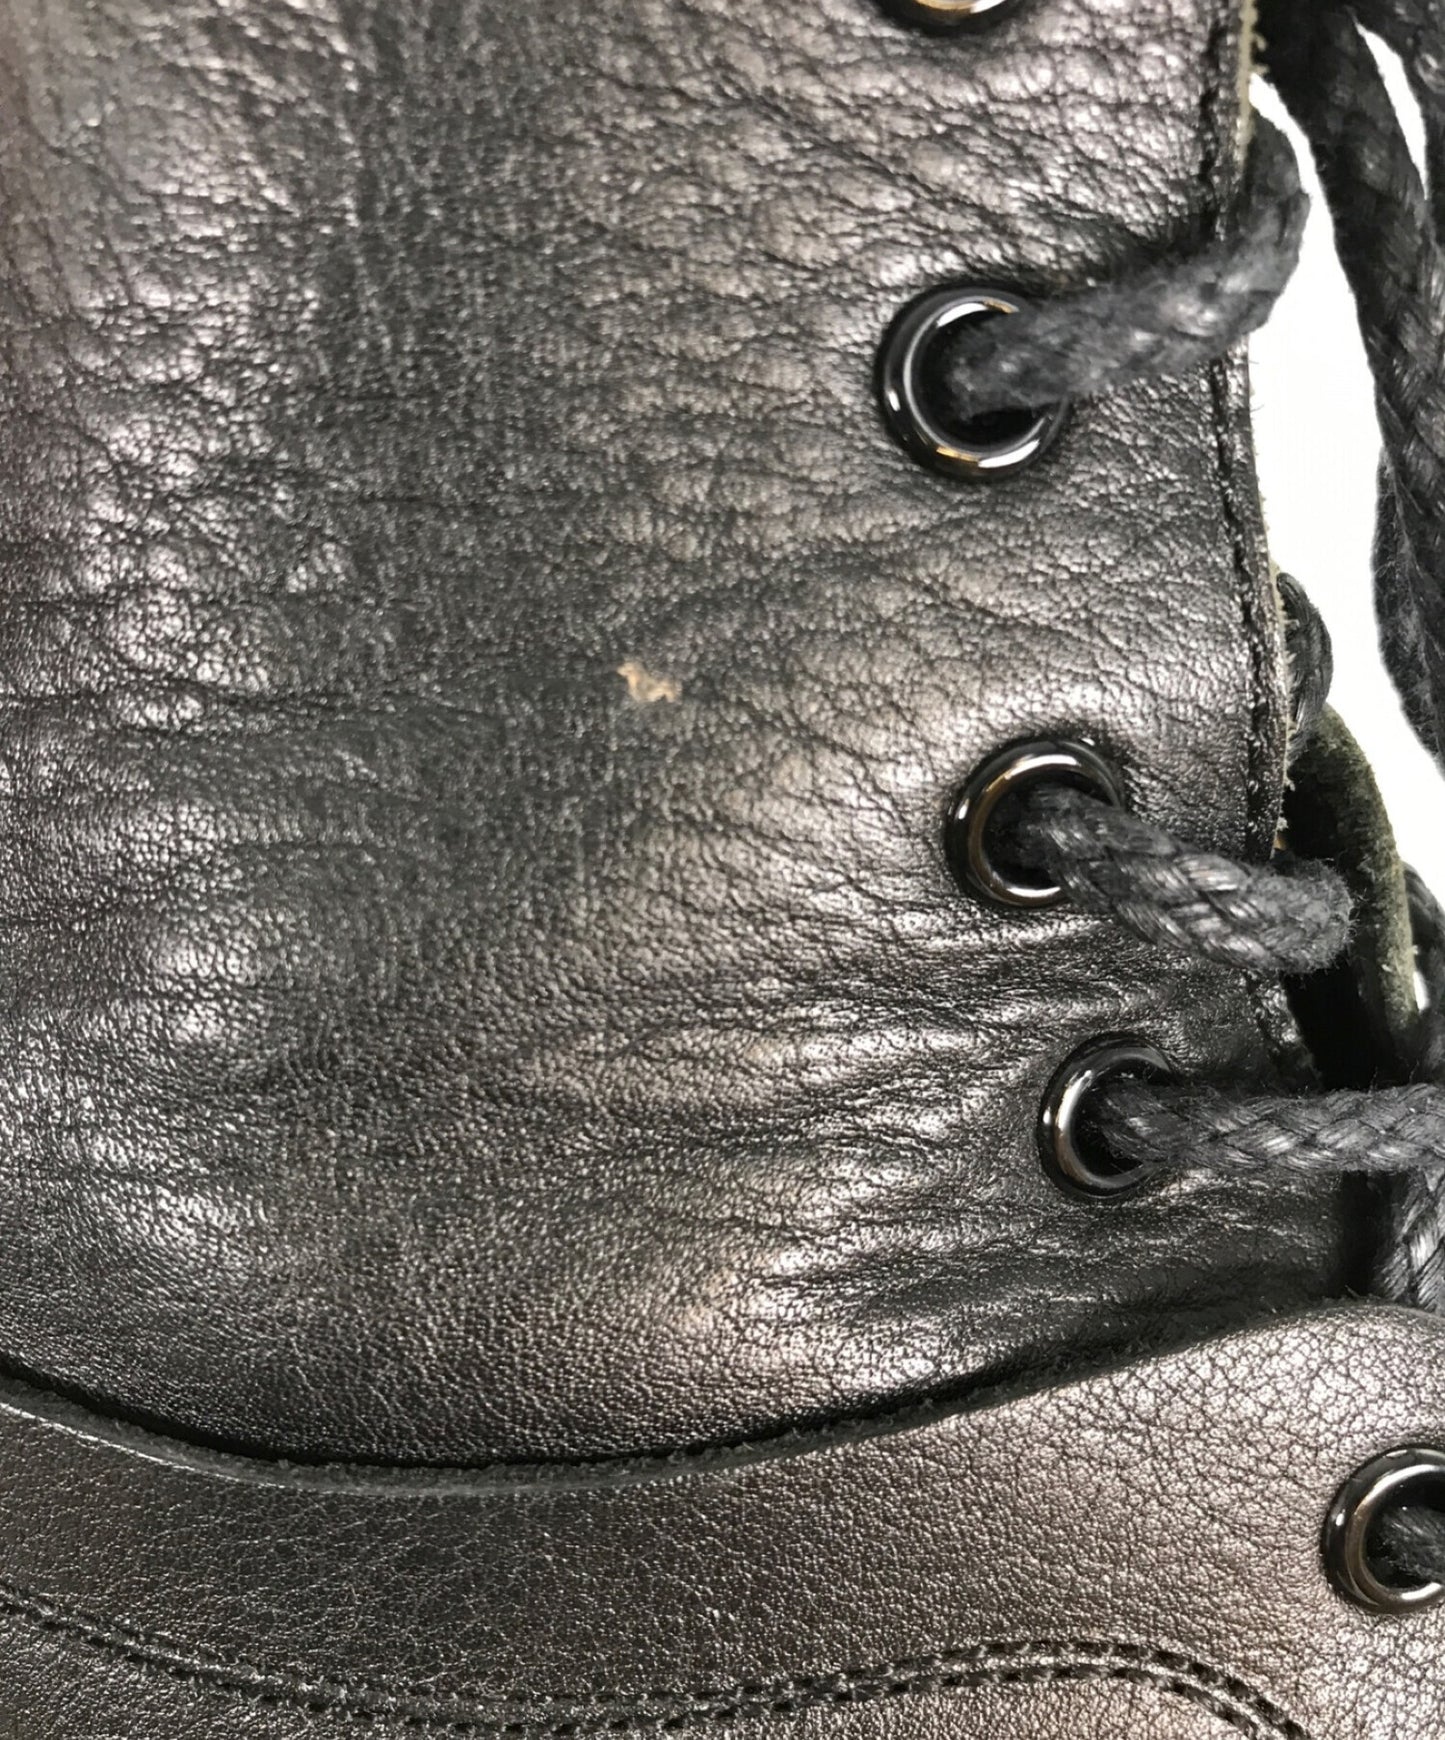 [Pre-owned] YOHJI YAMAMOTO Lace-up Boots Boots Leather Shoes Leather Shoes